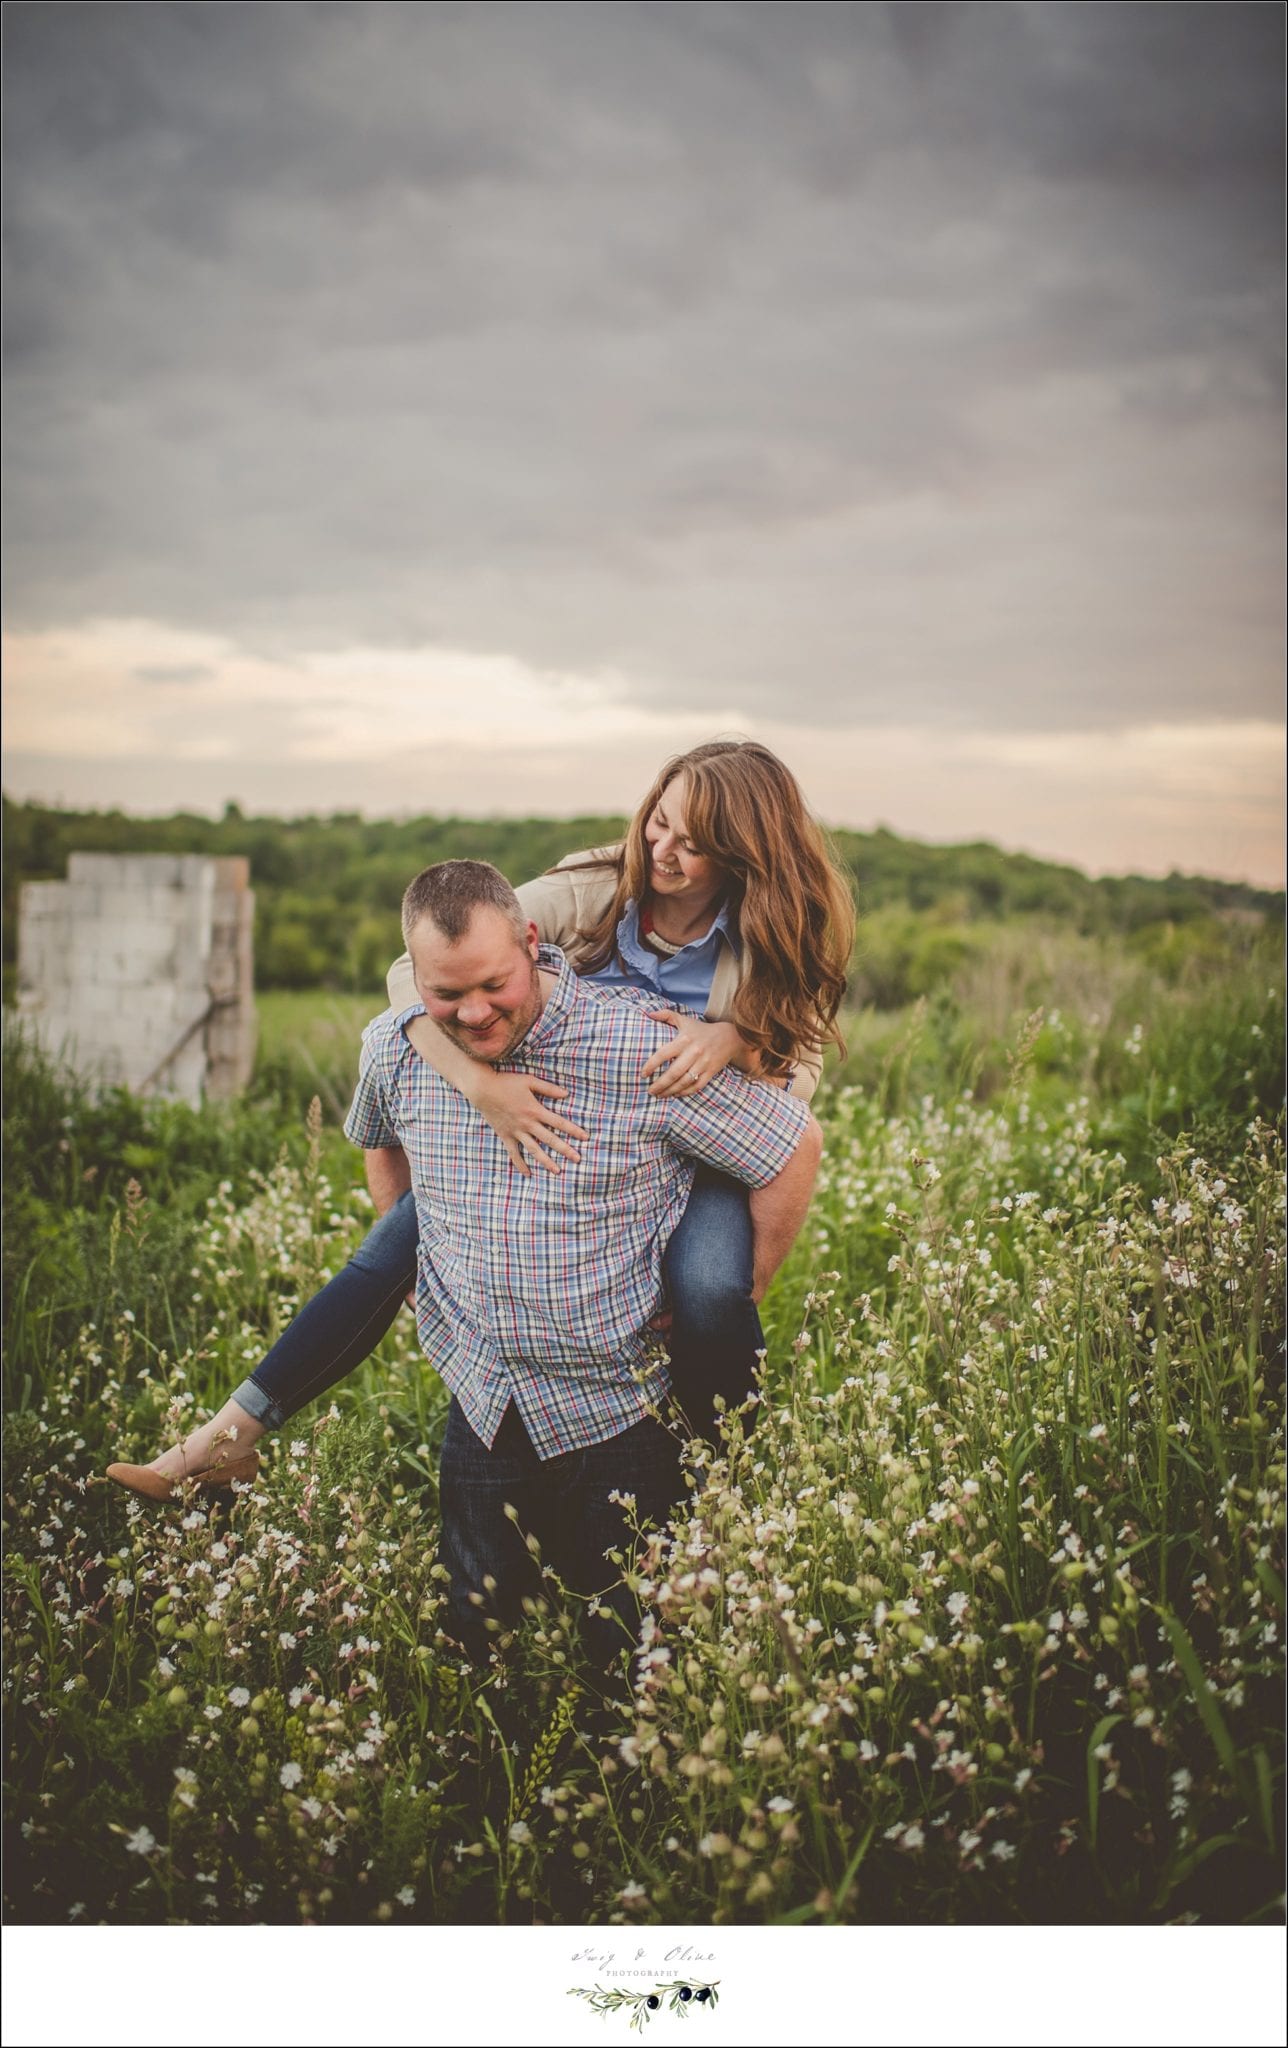 cherish, hold, piggyback, cute couples, outdoor sessions, darlington backdrops, country living, darlington skyline, Twig and olive photography